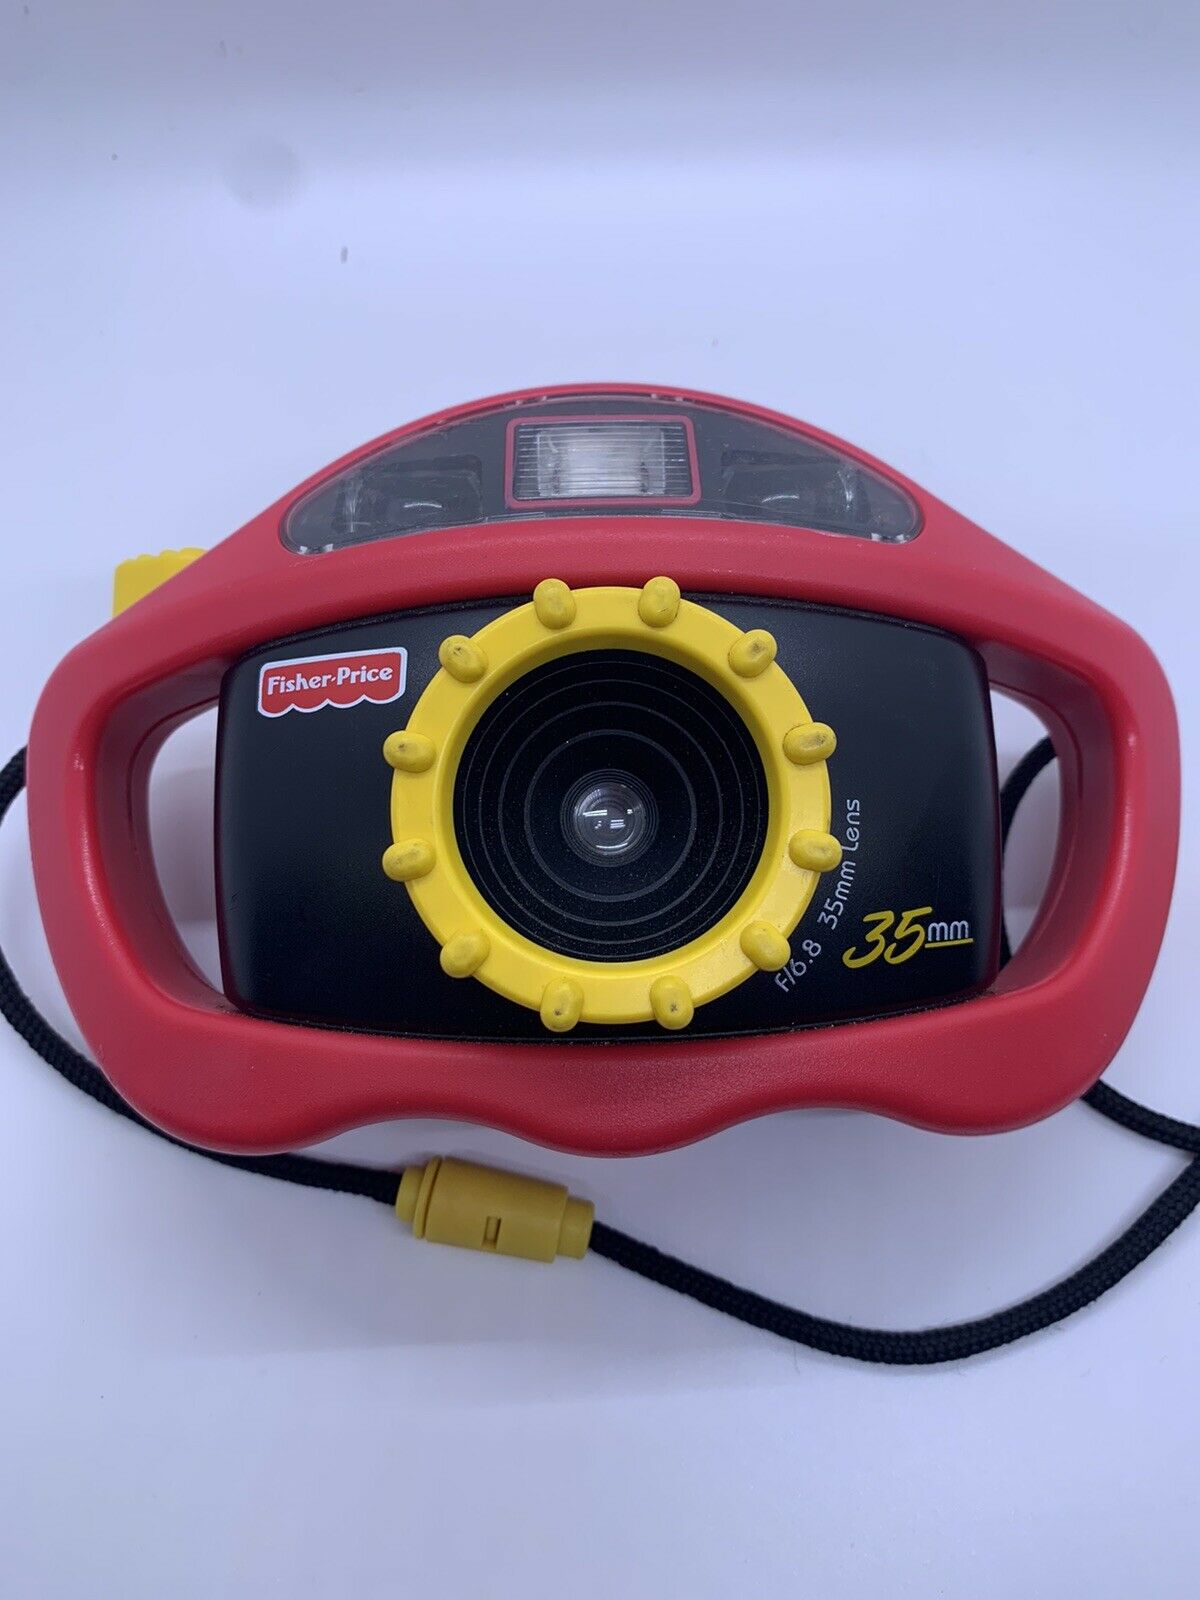 Fisher Price Perfect Shot 35 Mm Kids Camera 1997 Red & Yellow With Strap & Key